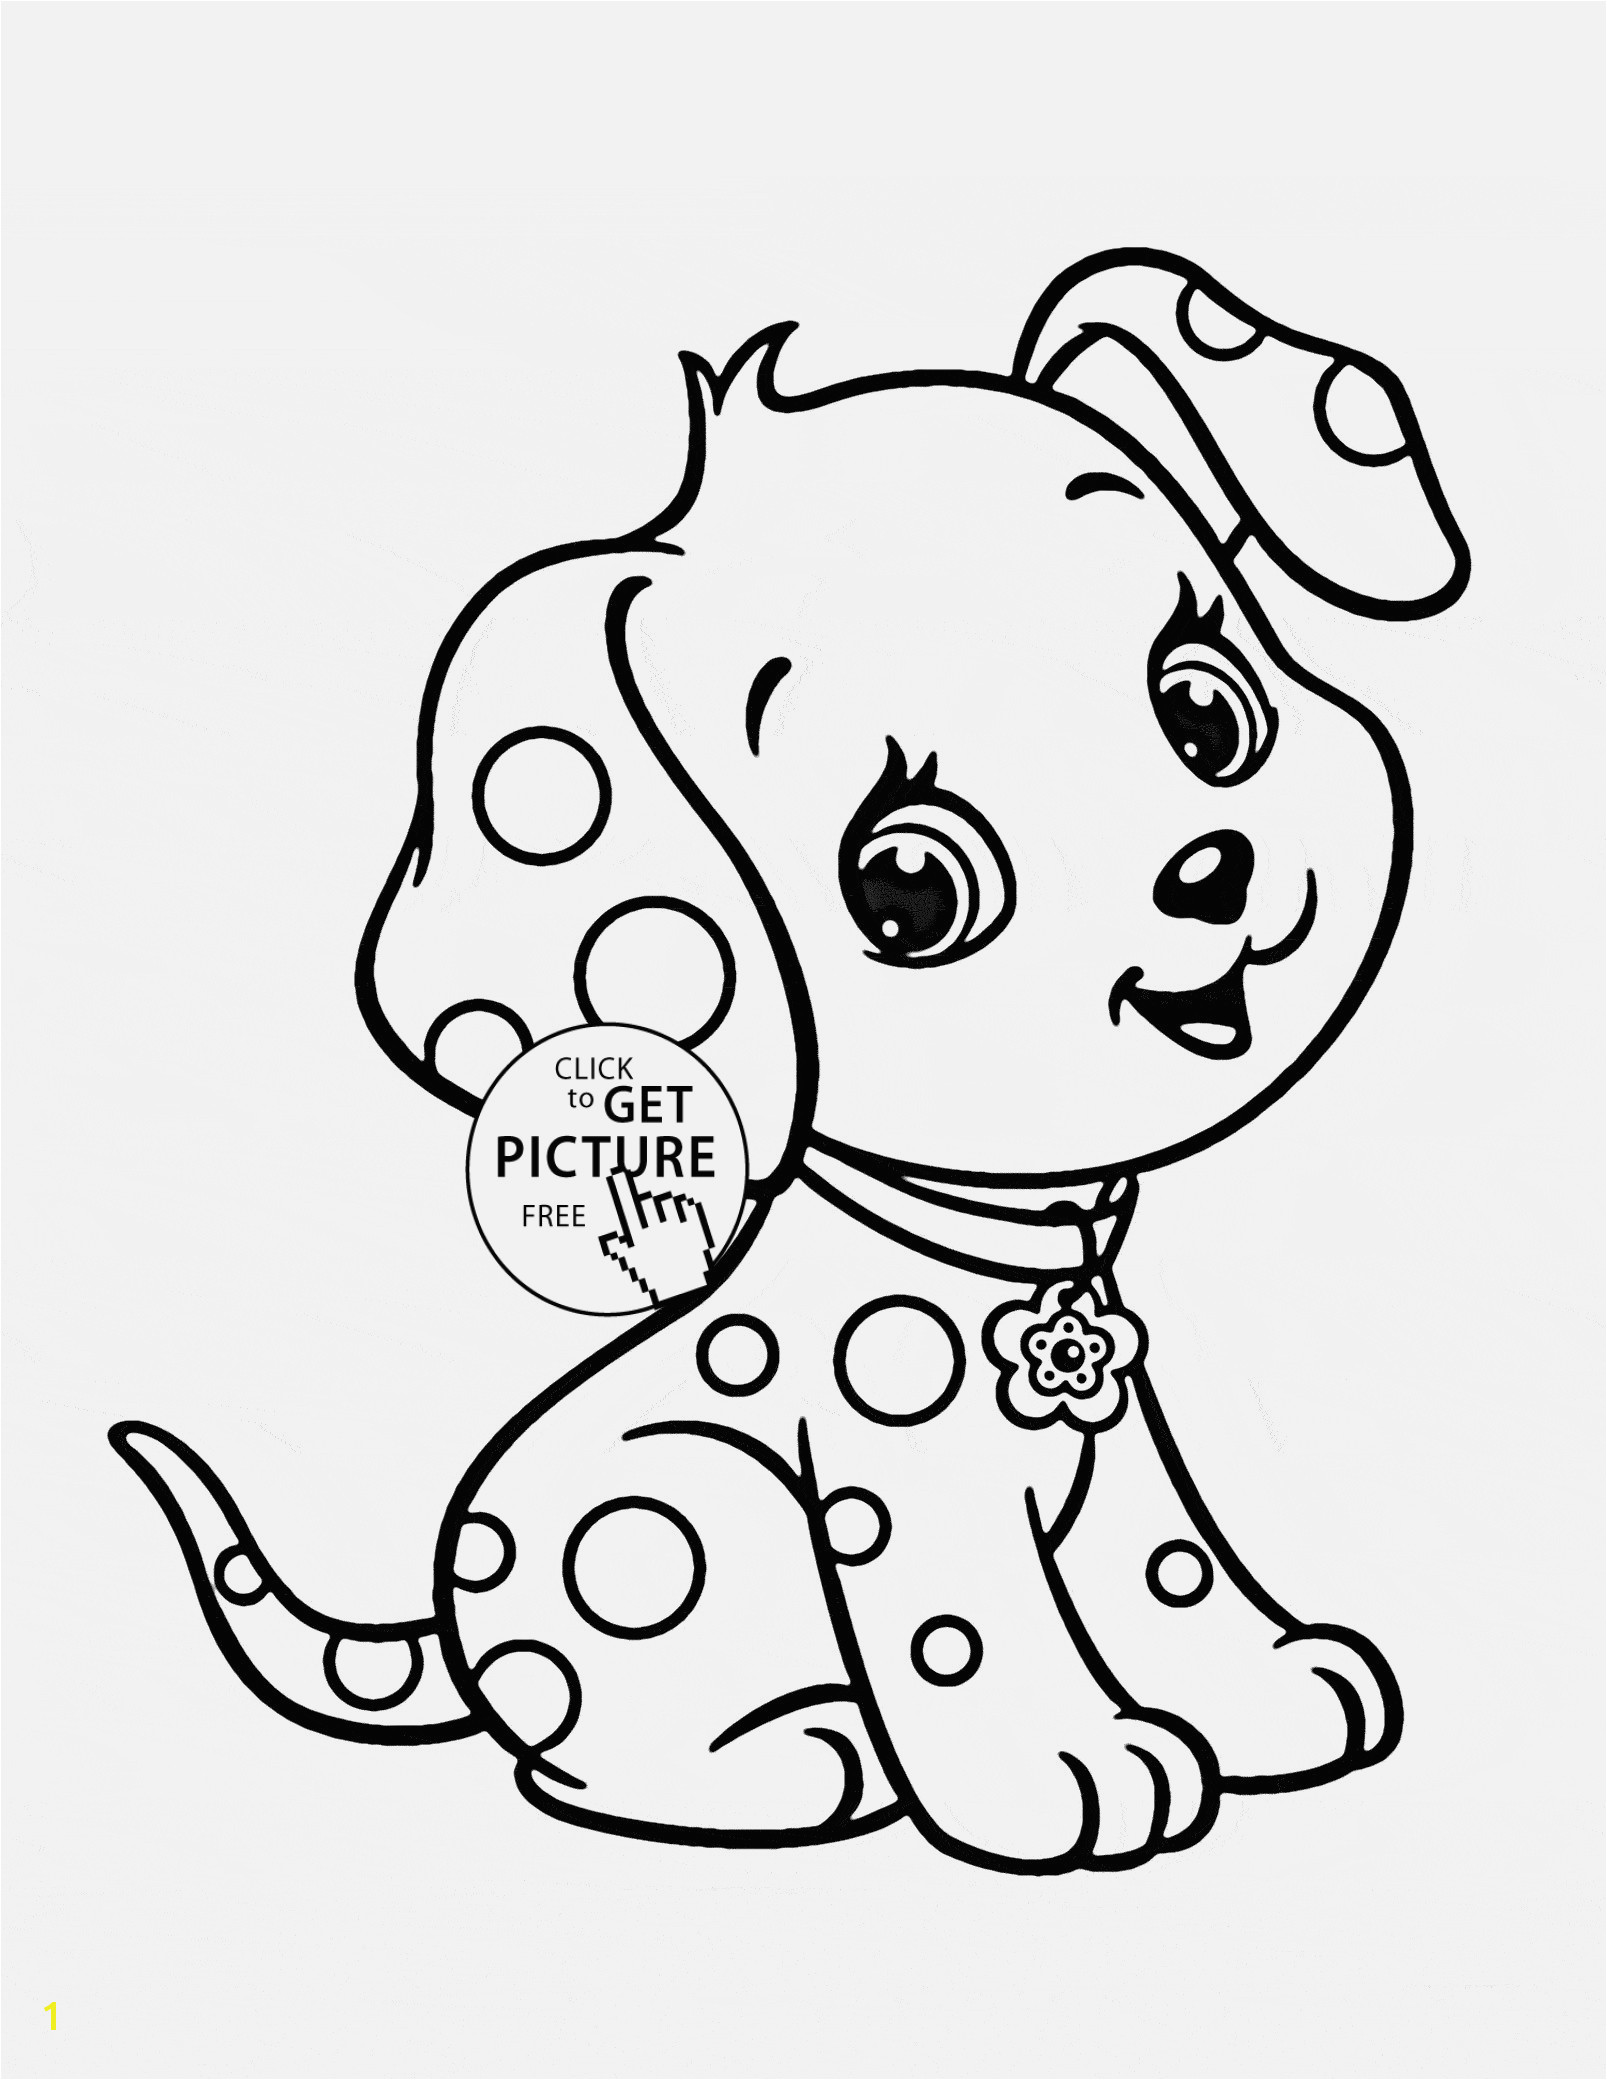 Coloring Pages Hard Amazing Advantages Animal Printables Luxury Unique Hard Animal Coloring Pages Ideas for